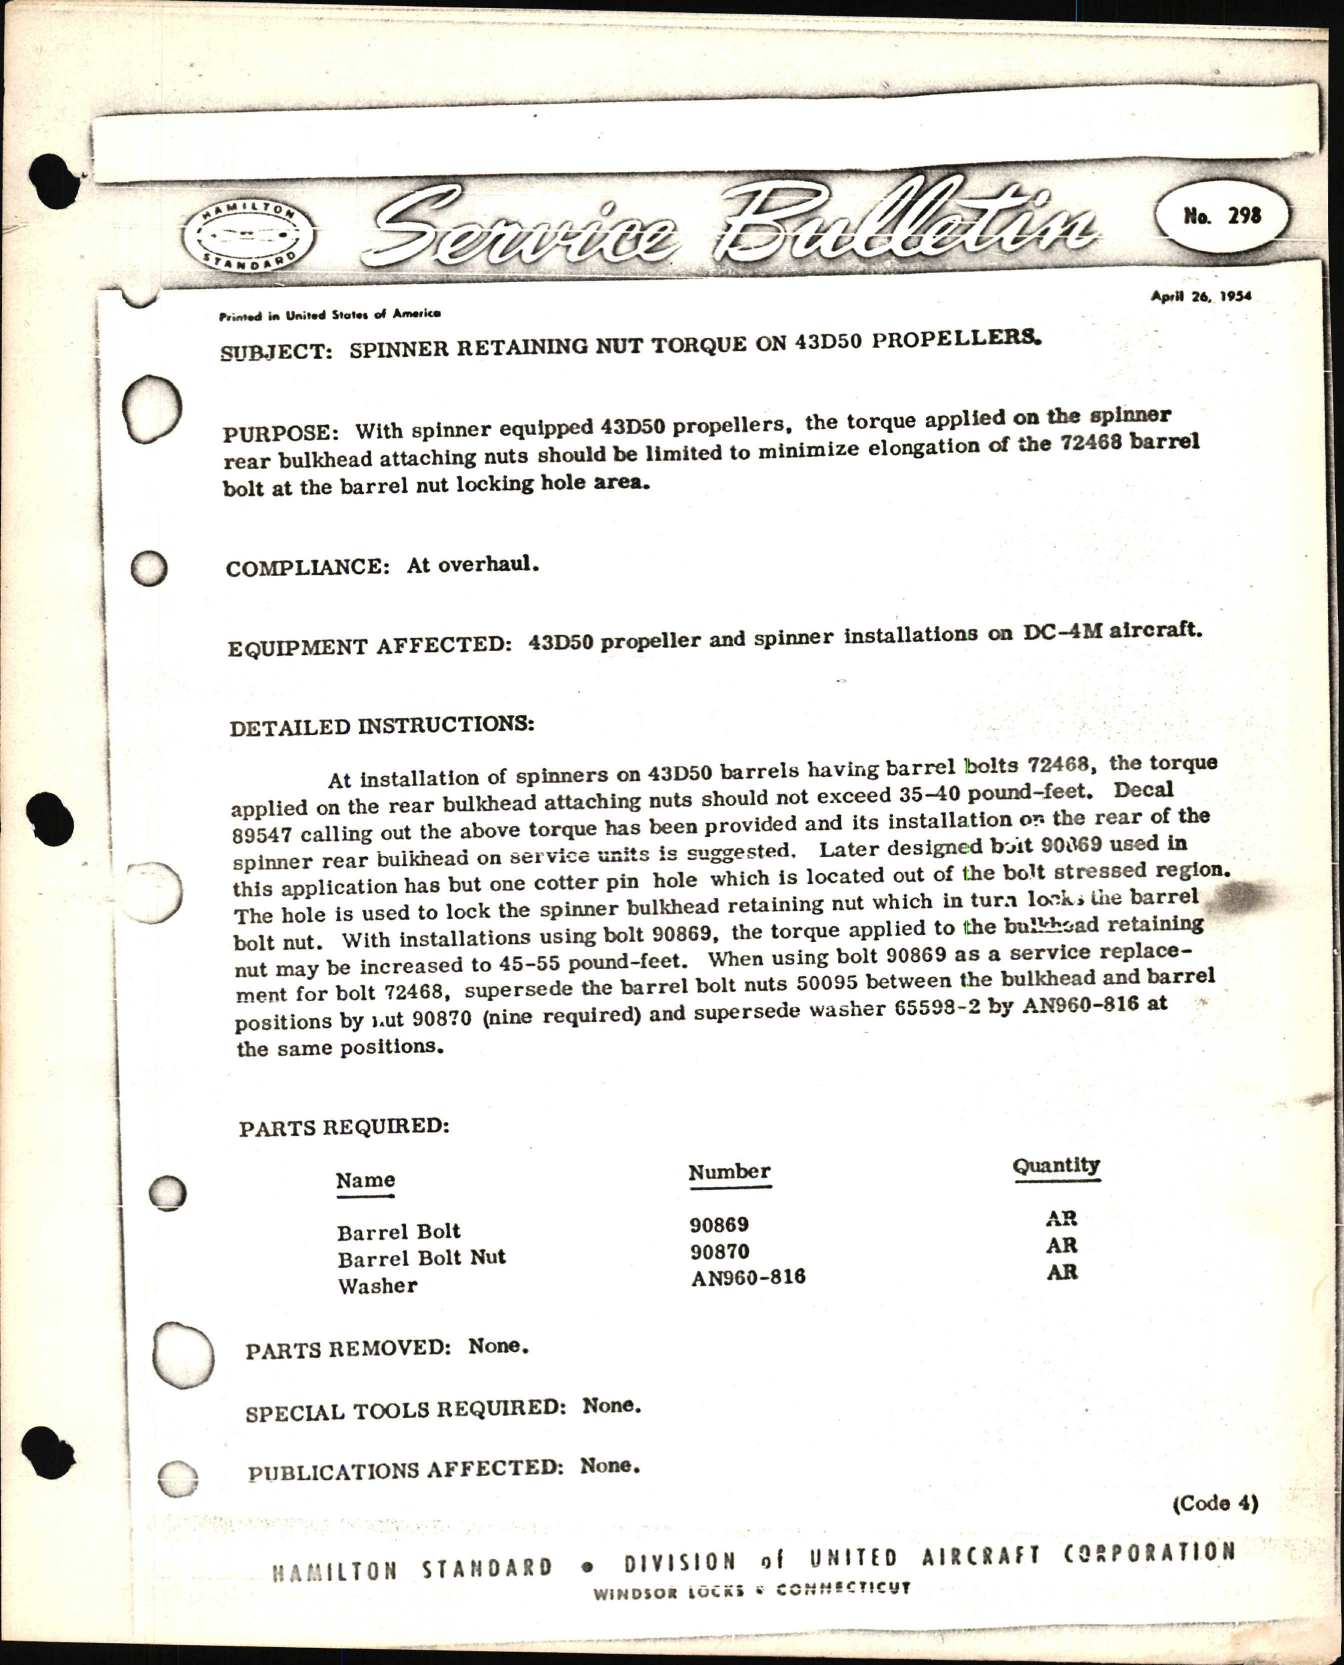 Sample page 1 from AirCorps Library document: Spinner Retaining Nut Torque on 43D50 Propellers